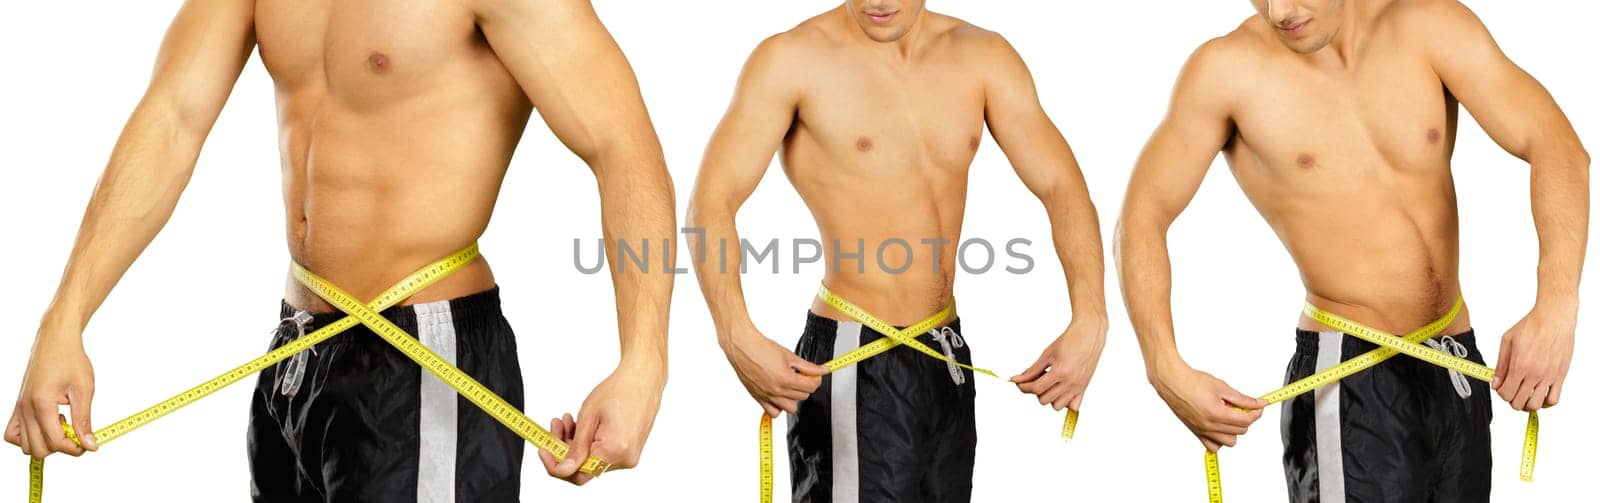 photo collage of young adult man making fitness excercise